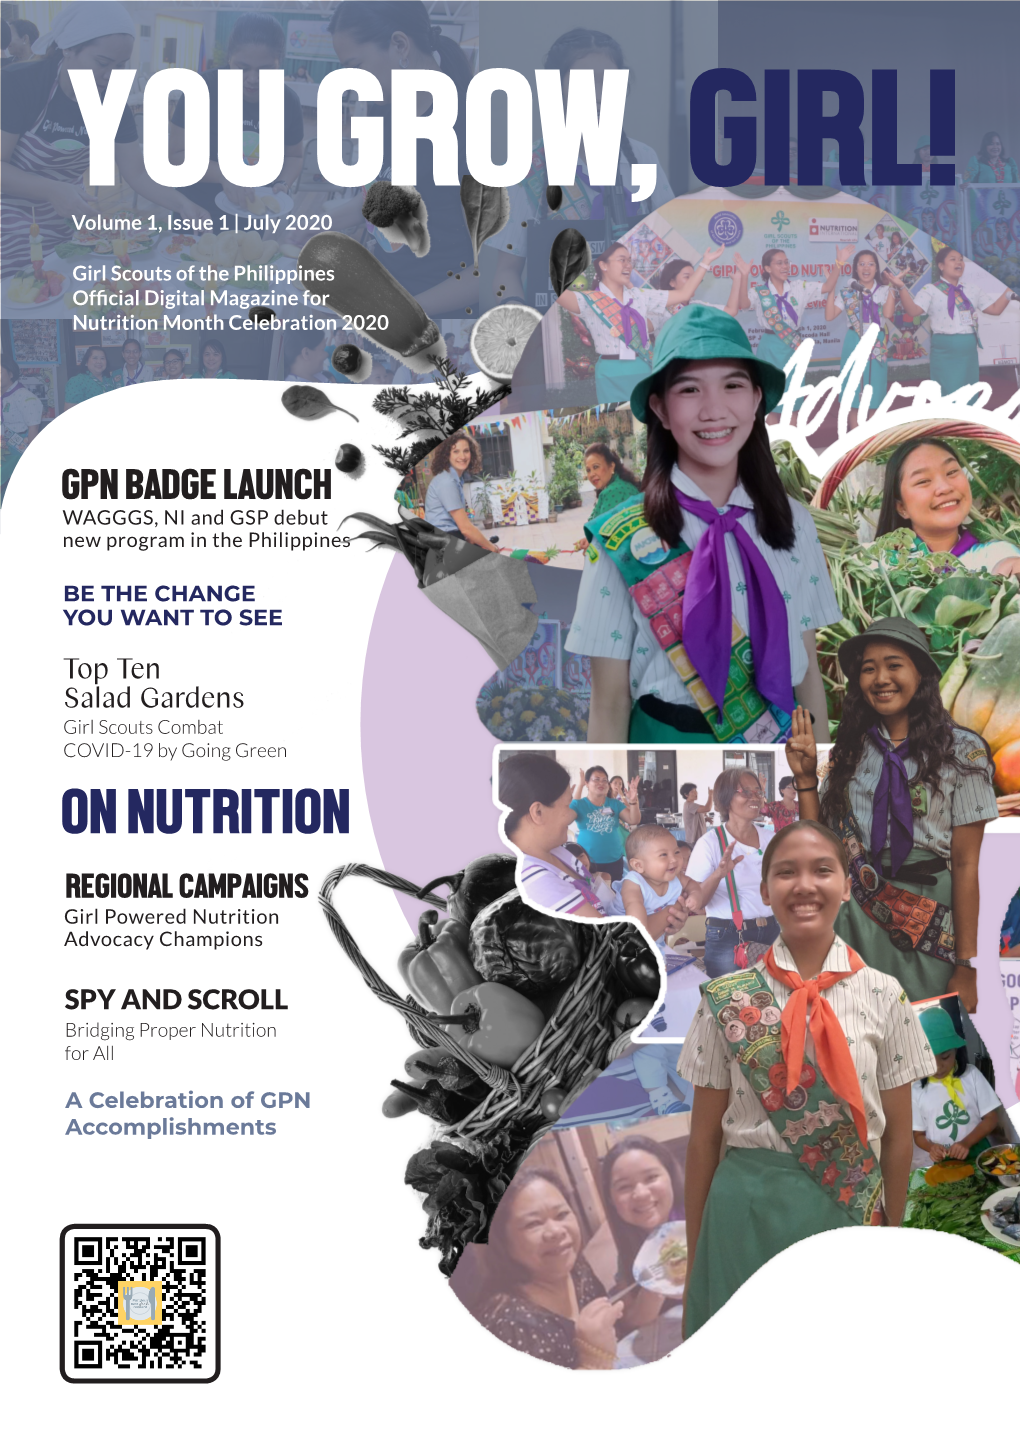 ON NUTRITION REGIONAL CAMPAIGNS Girl Powered Nutrition Advocacy Champions